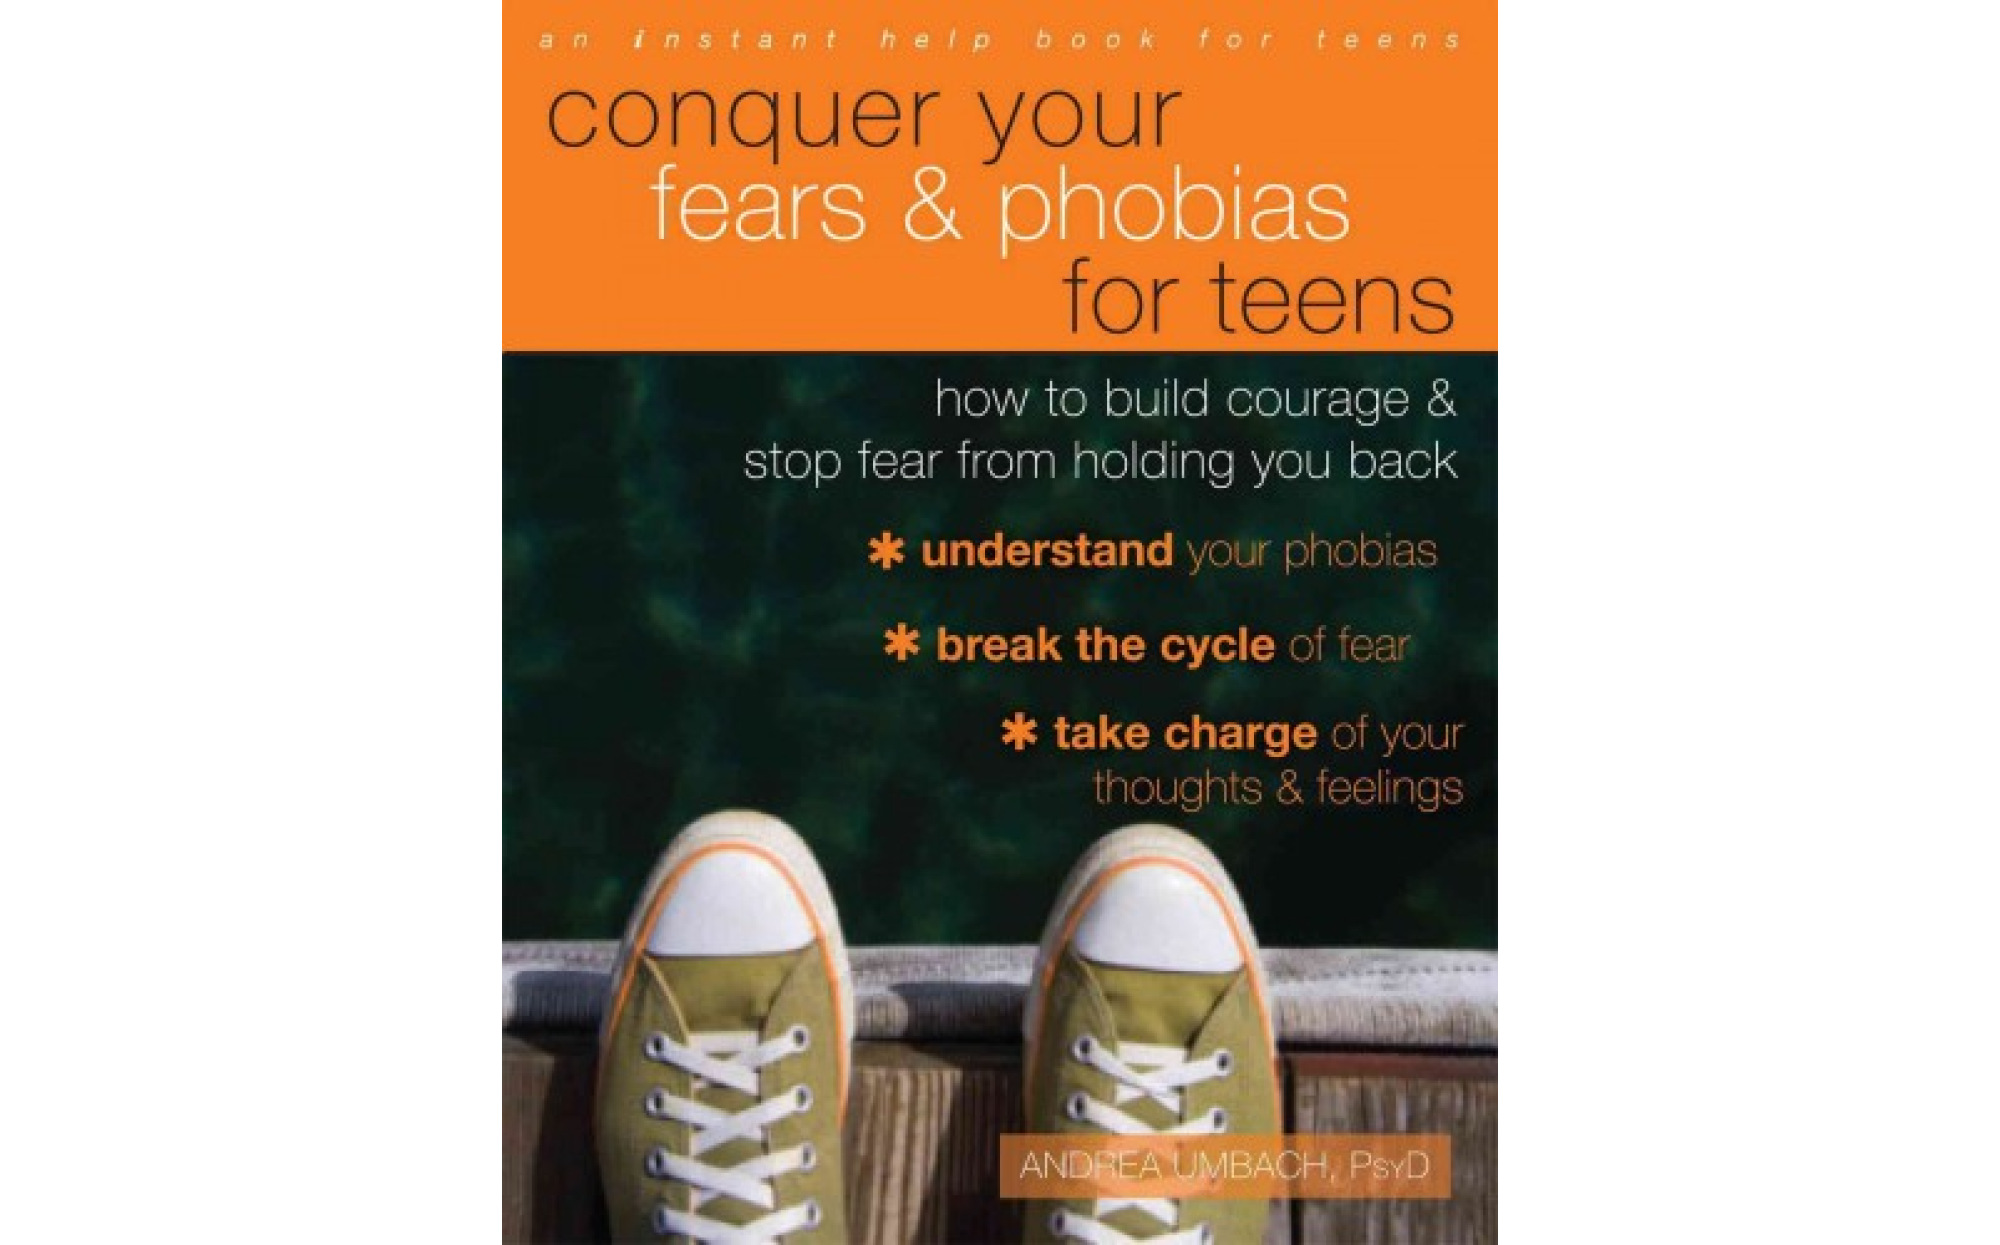 Anxiety And Vomiting in Teenager: Conquer Fear with these Proven Tips